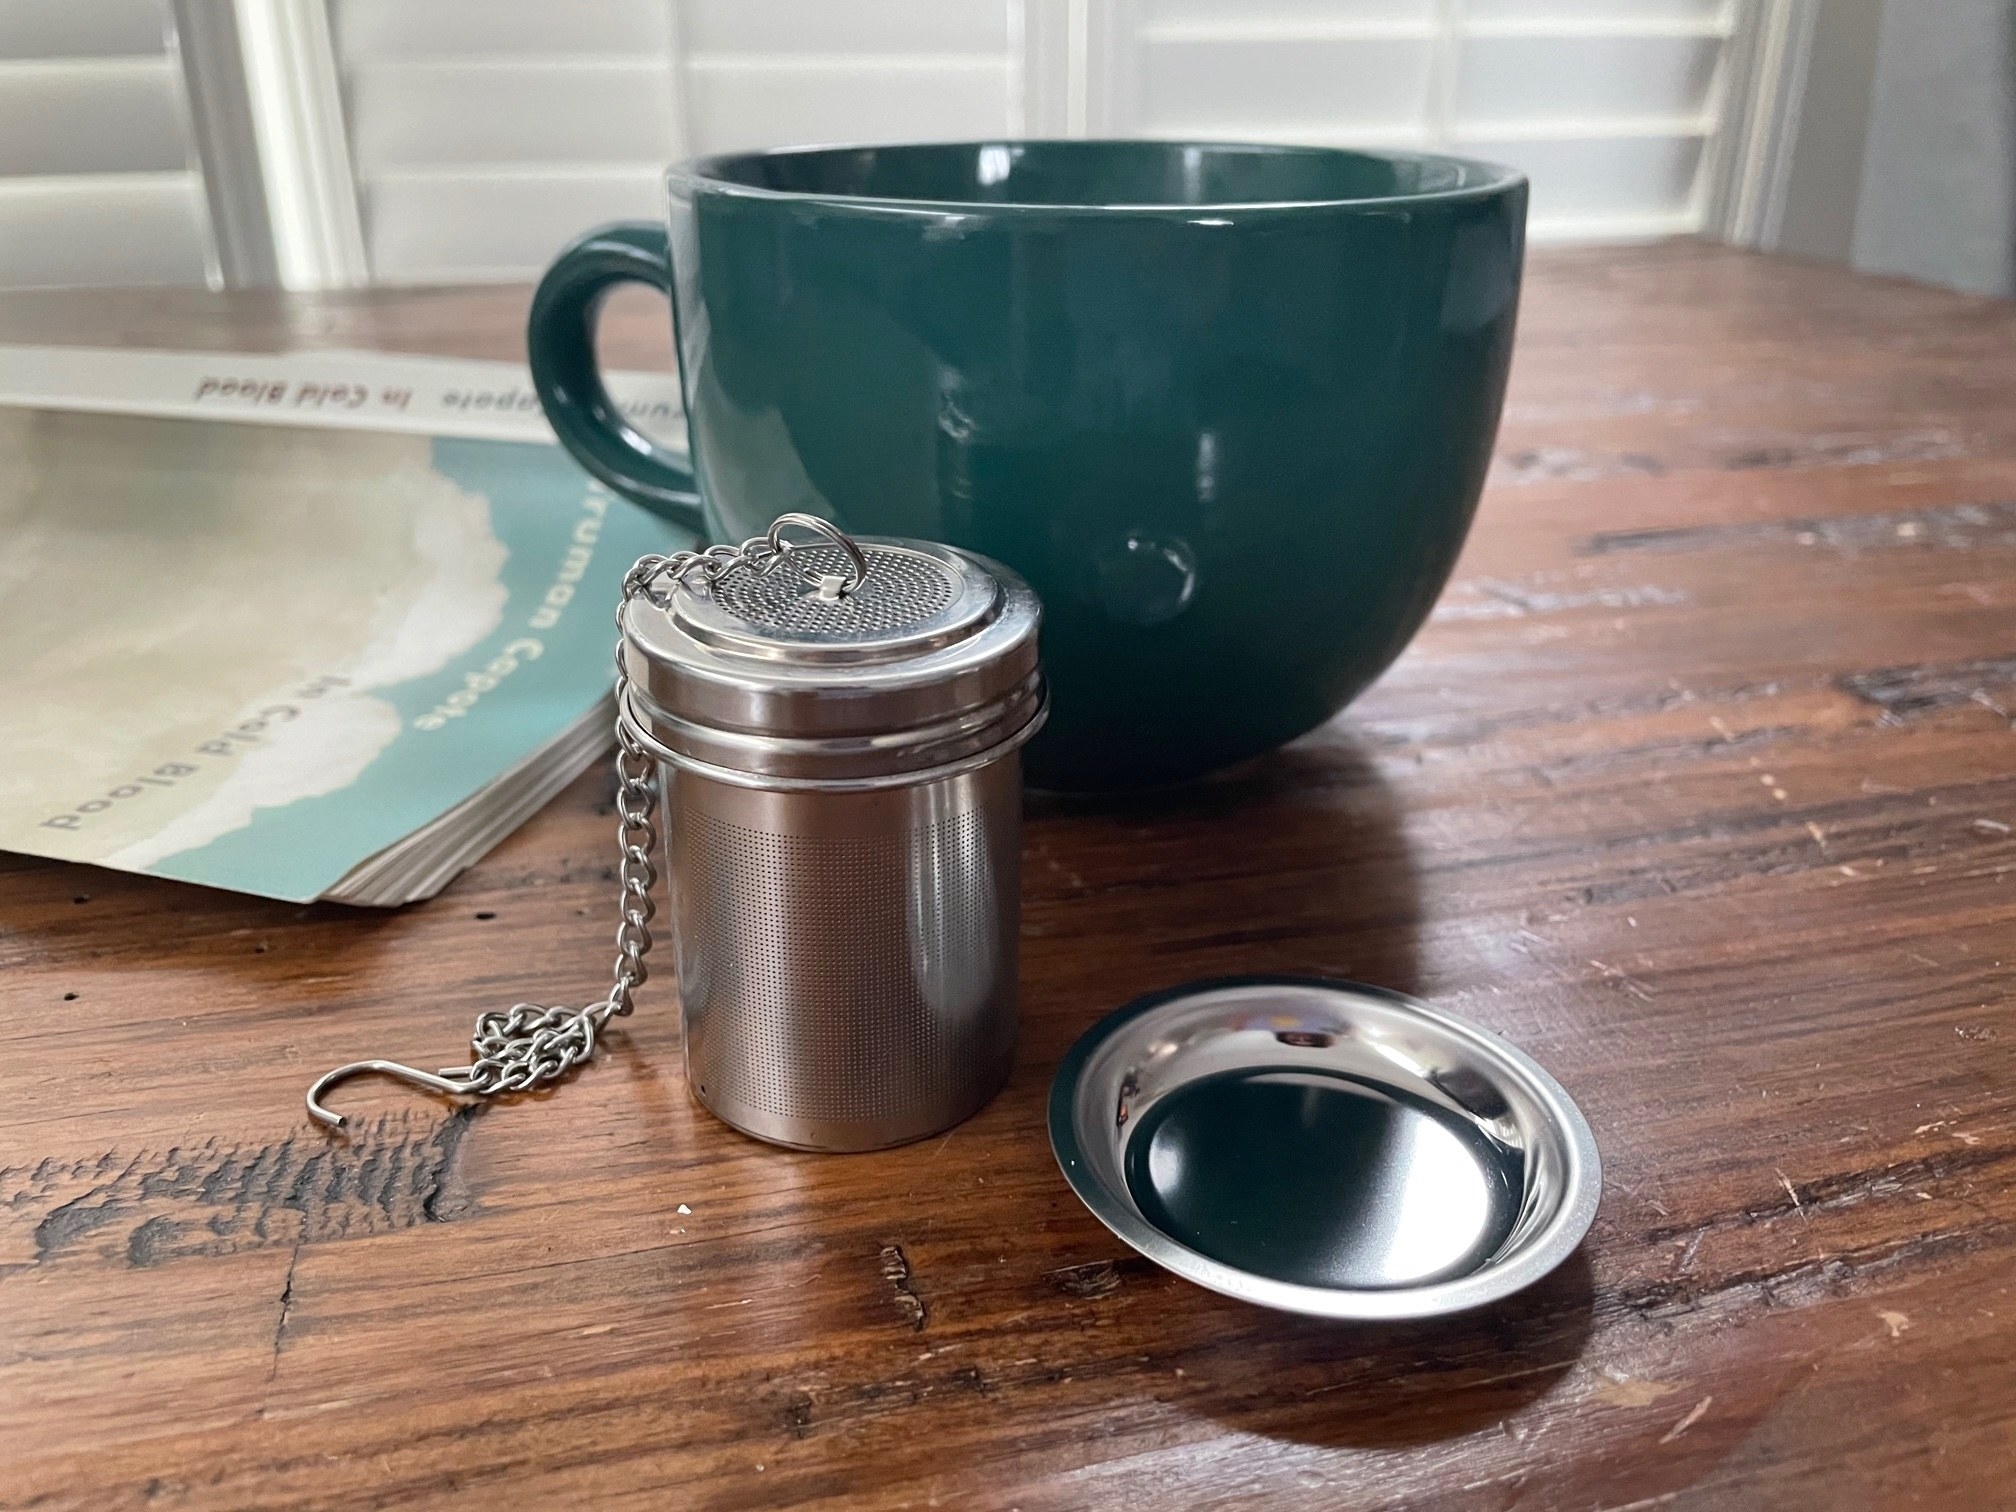 The tea strainer next to its plate and a mug 